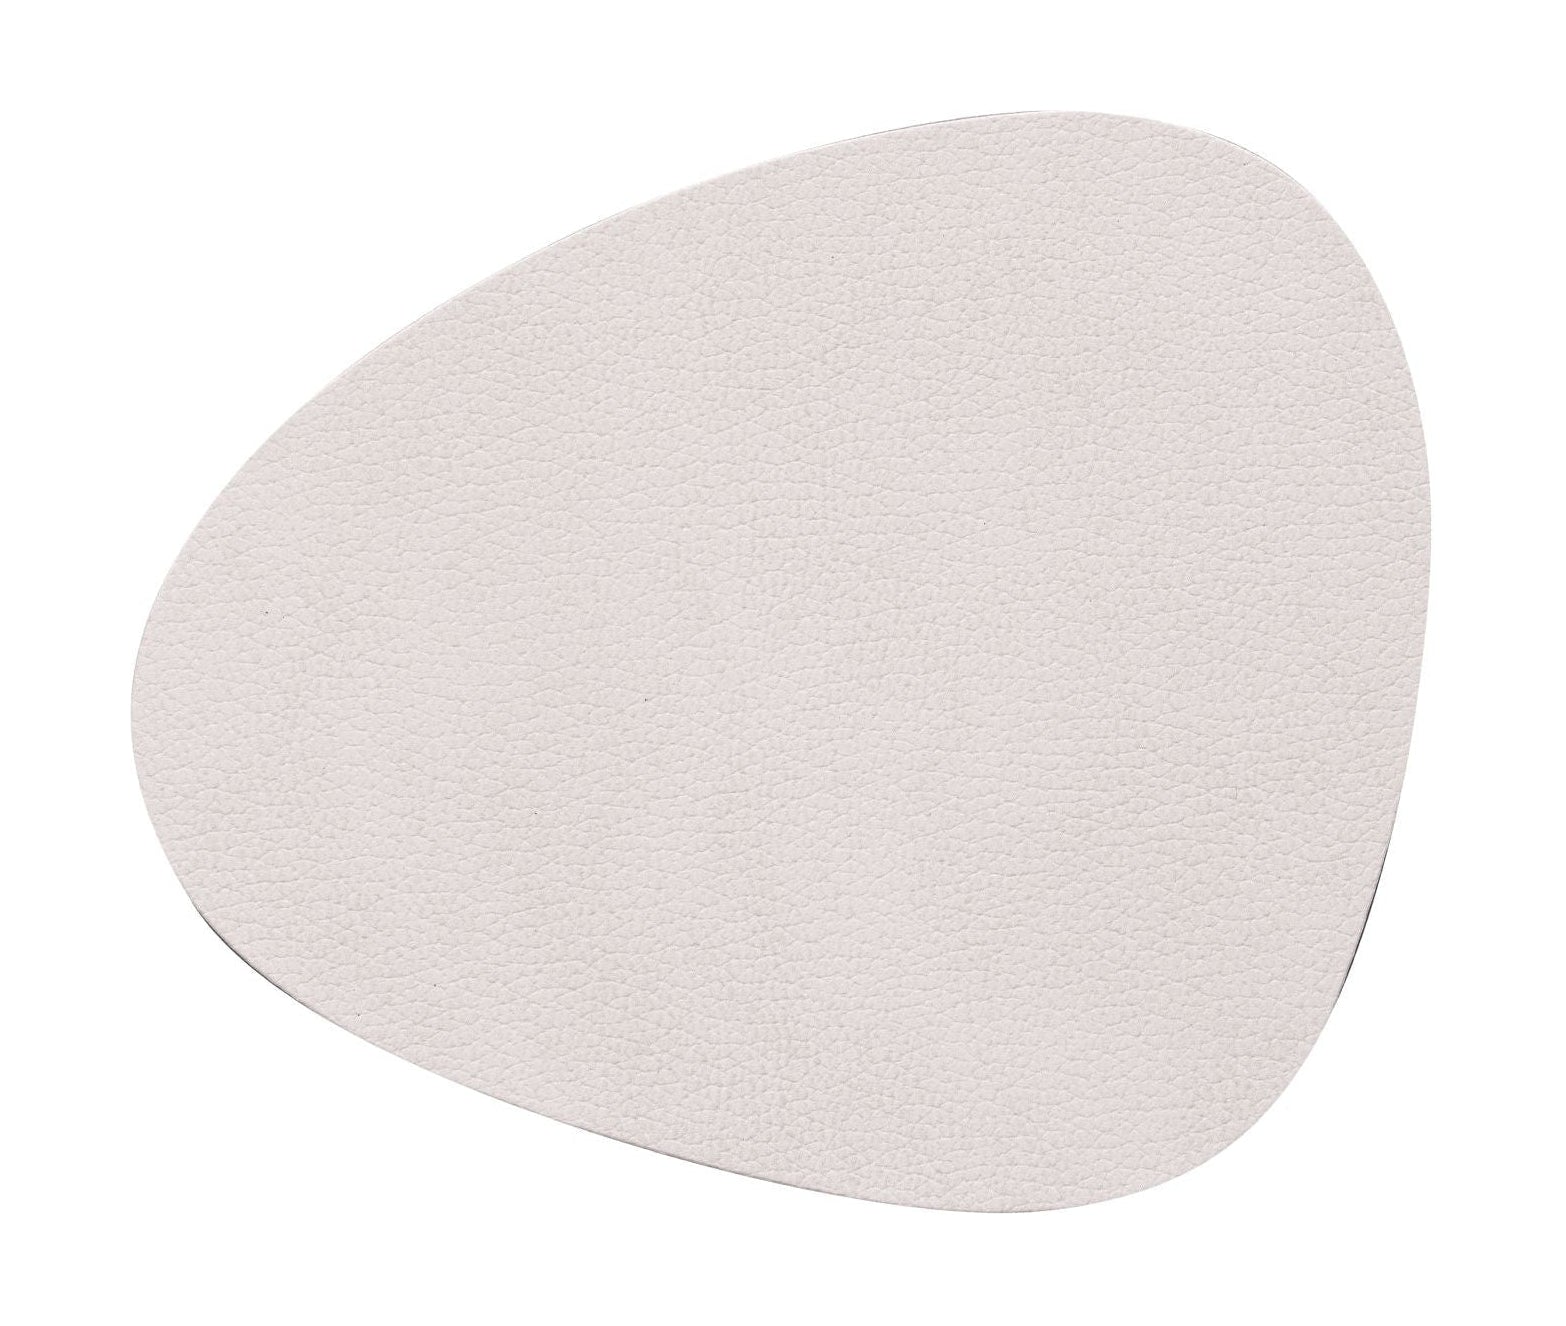 Lind Dna Courbe de tapis GLAS, Oyster blanc